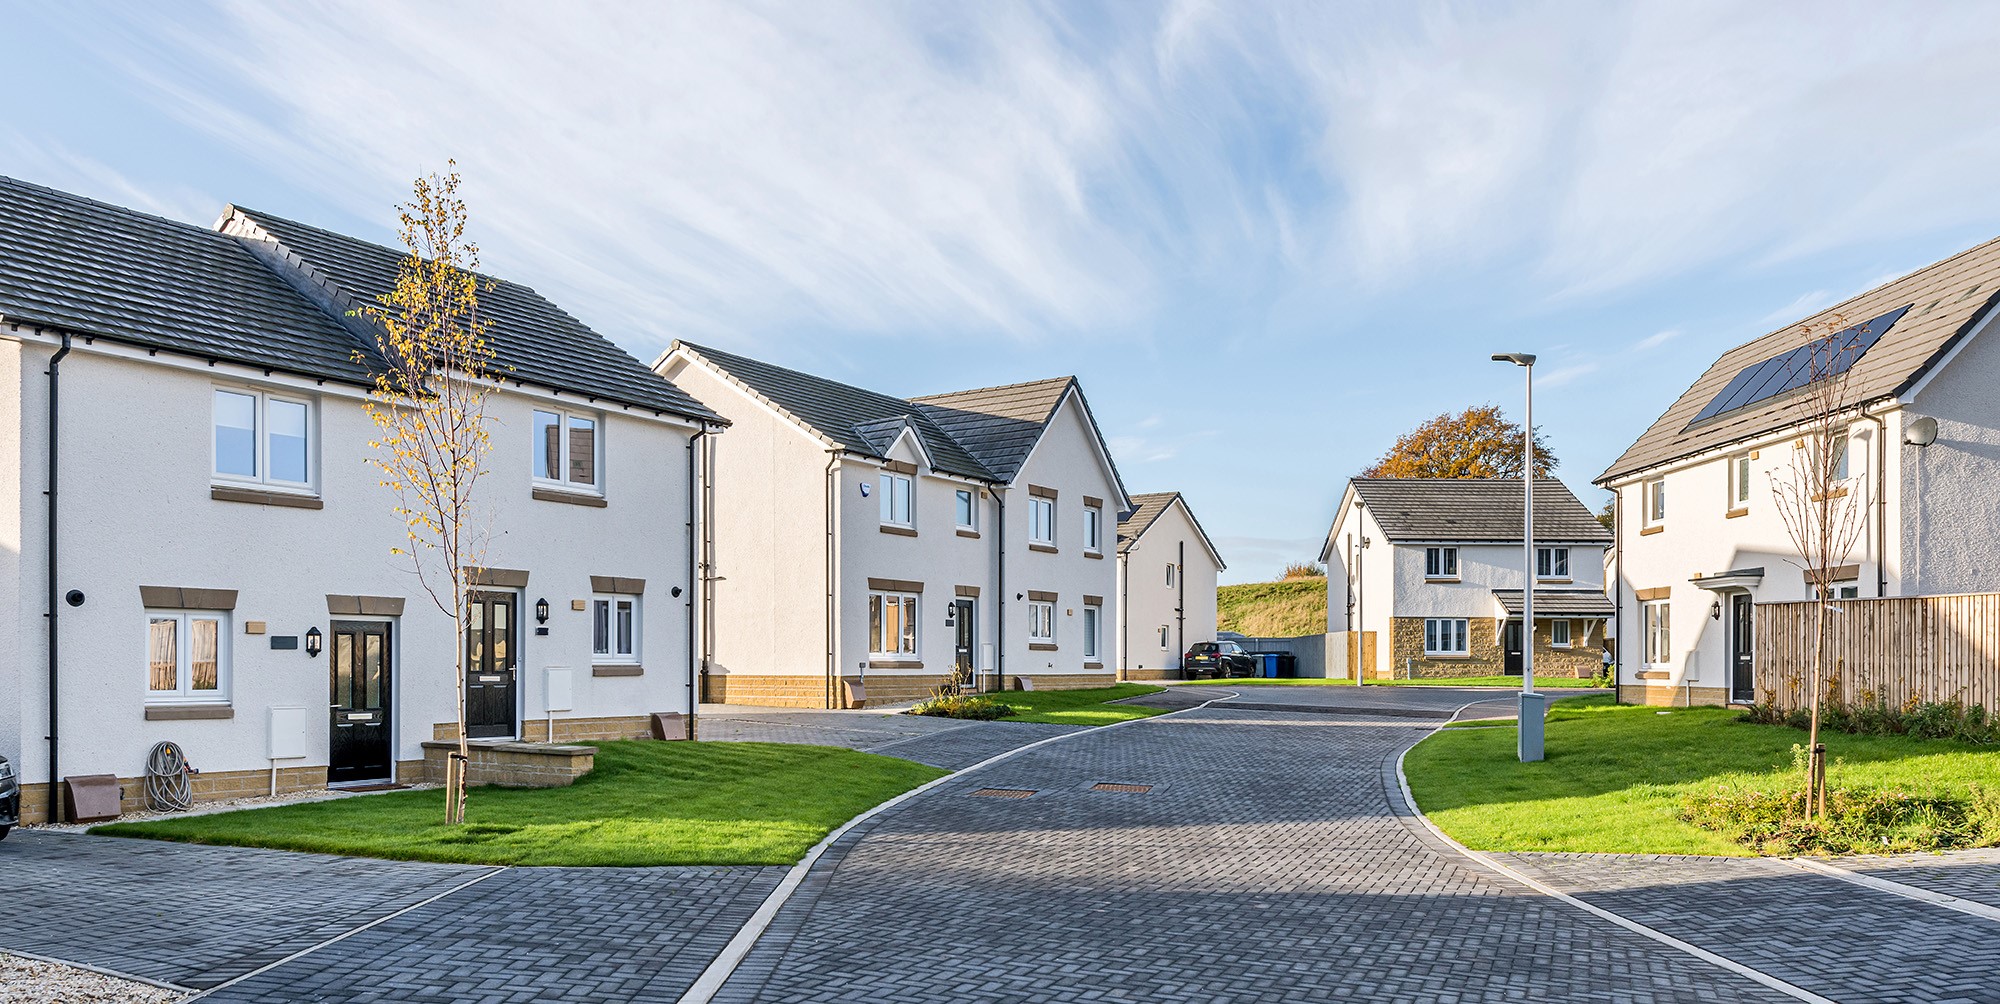 Taylor Wimpey lodges detailed plans for next phase at Carnbroe